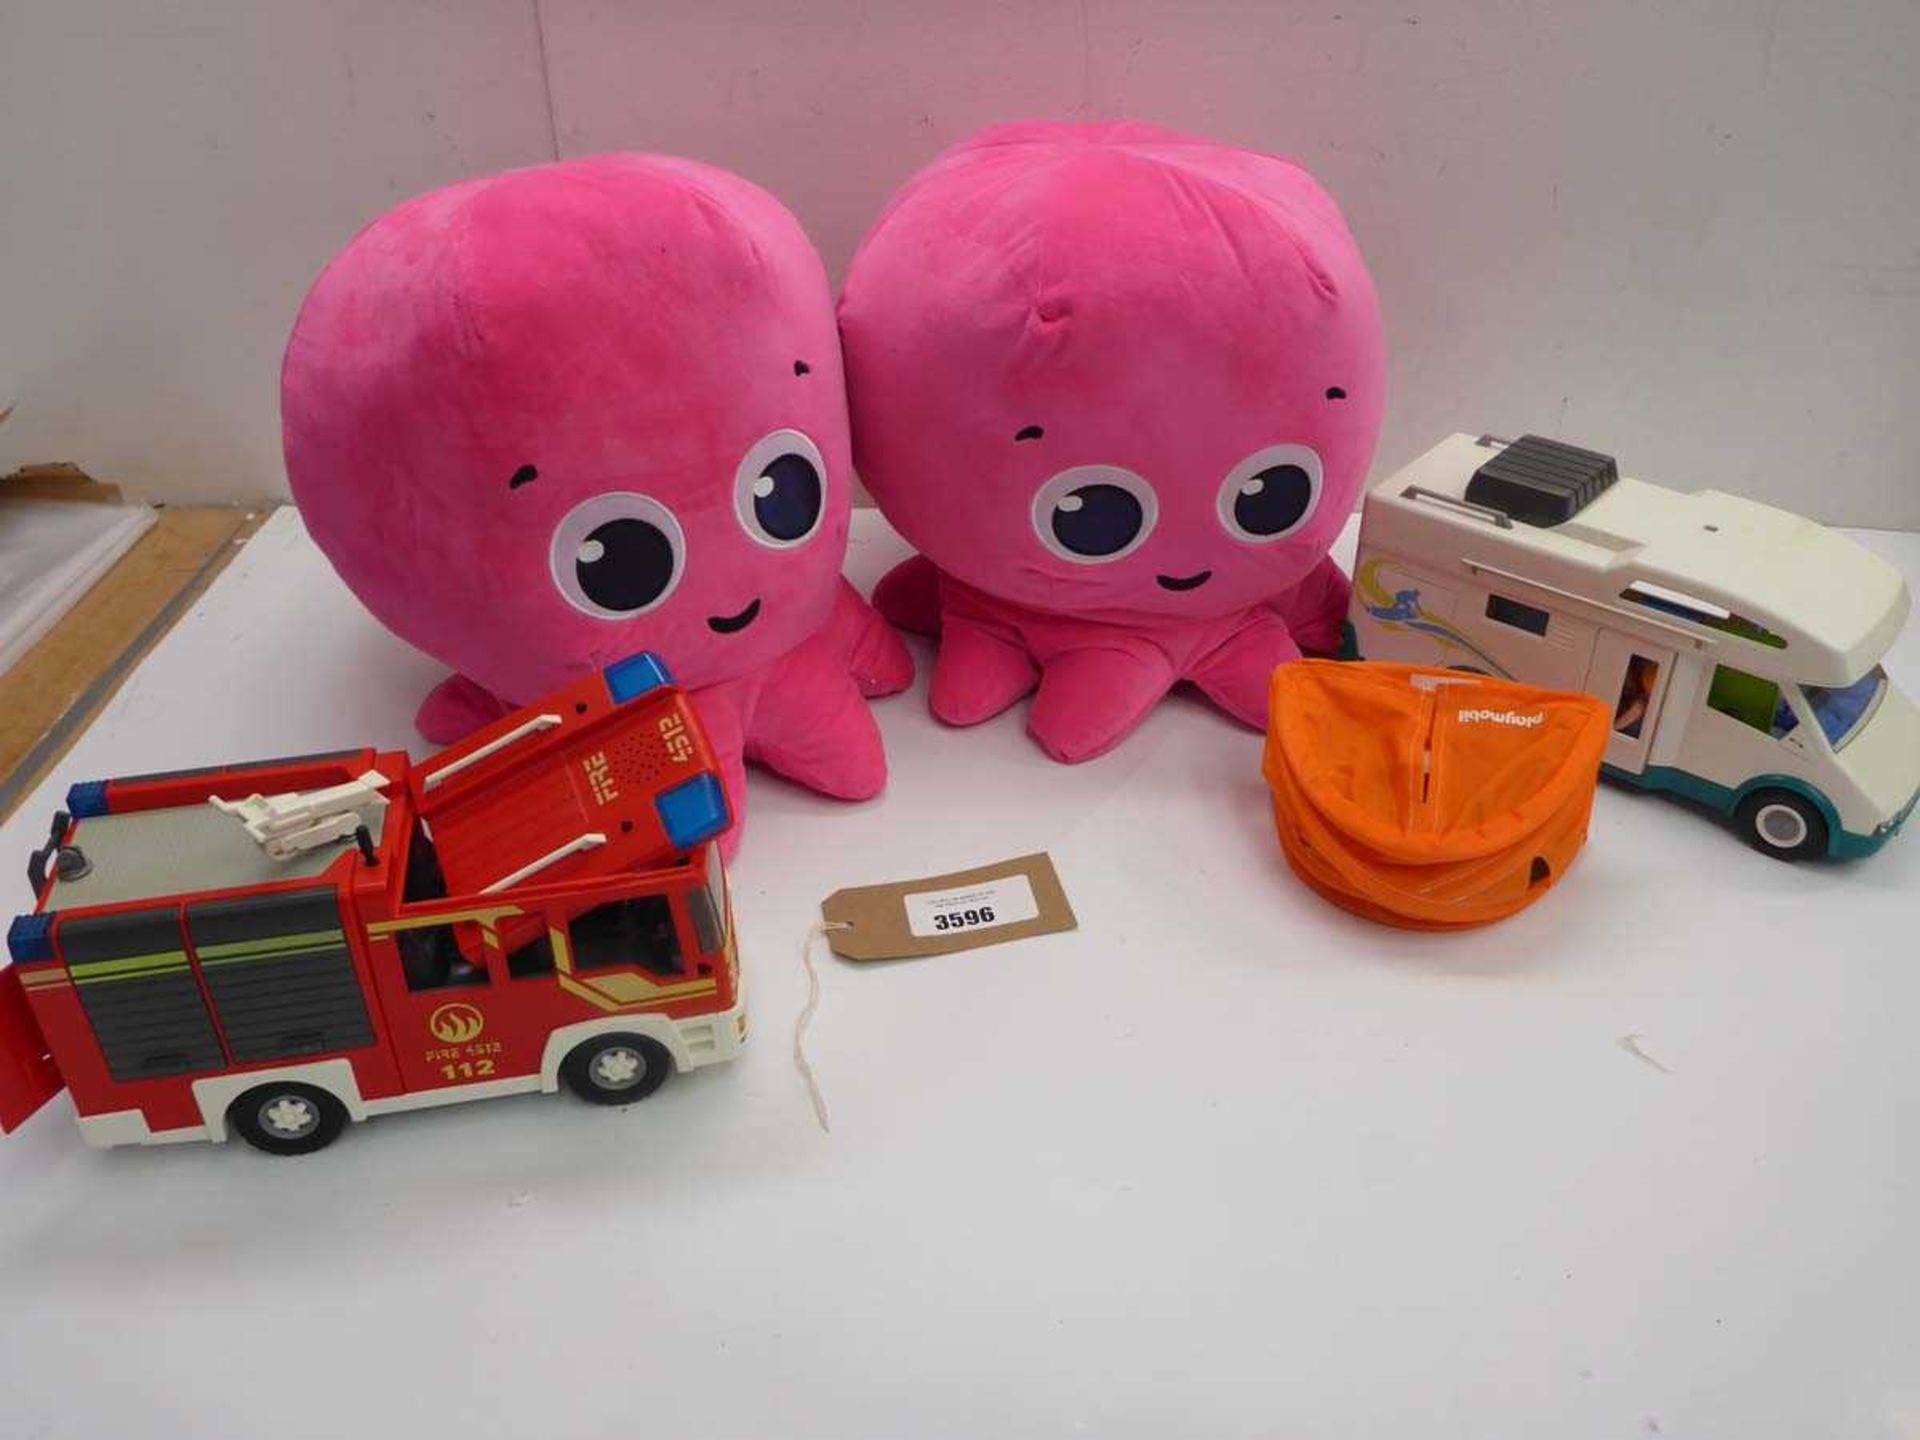 +VAT 2 large plush octopus, toy fire engine and toy camper van